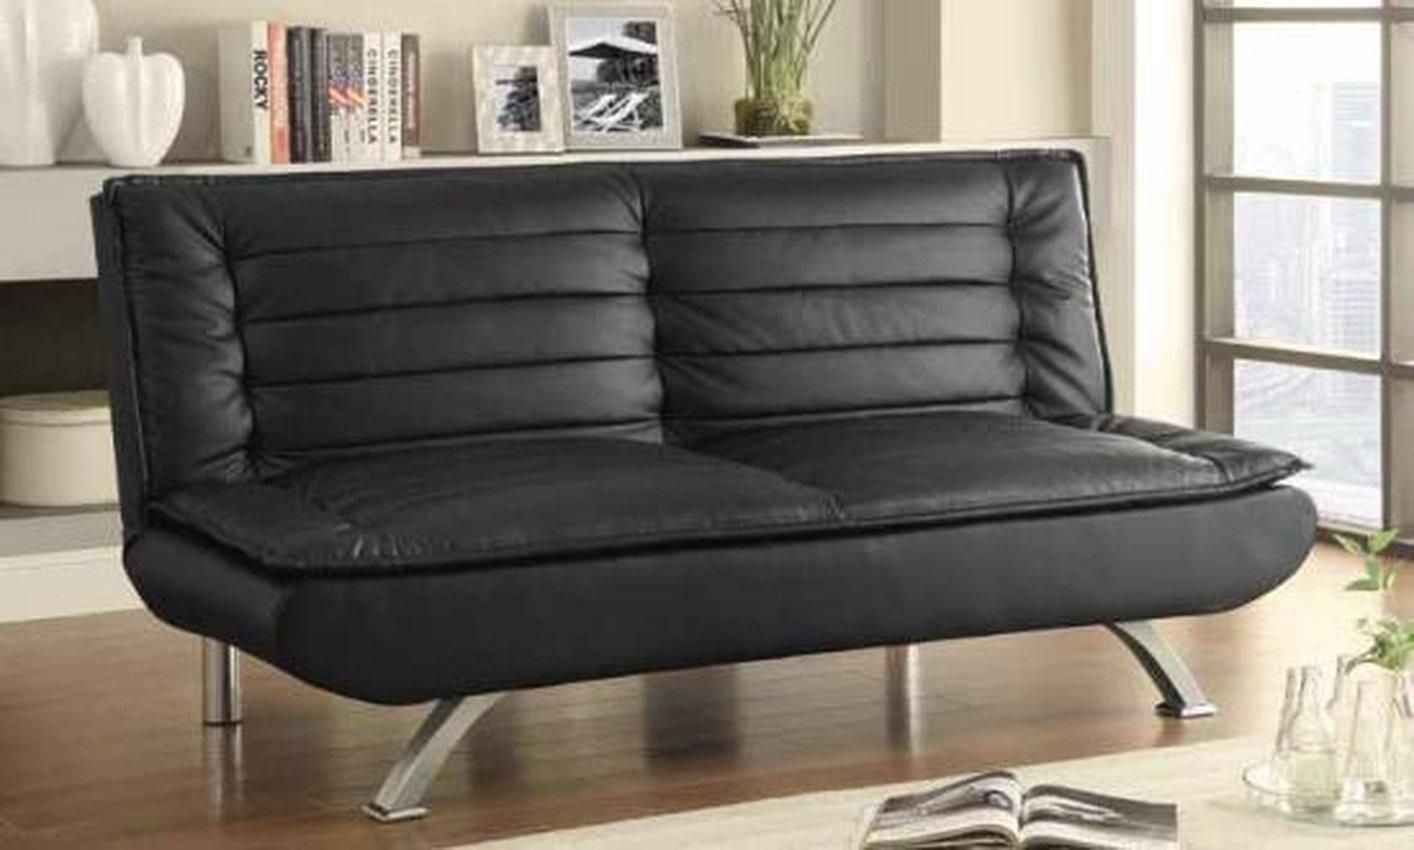 Coaster Futons | Roselawnlutheran Intended For Coaster Futon Sofa Beds (View 15 of 20)